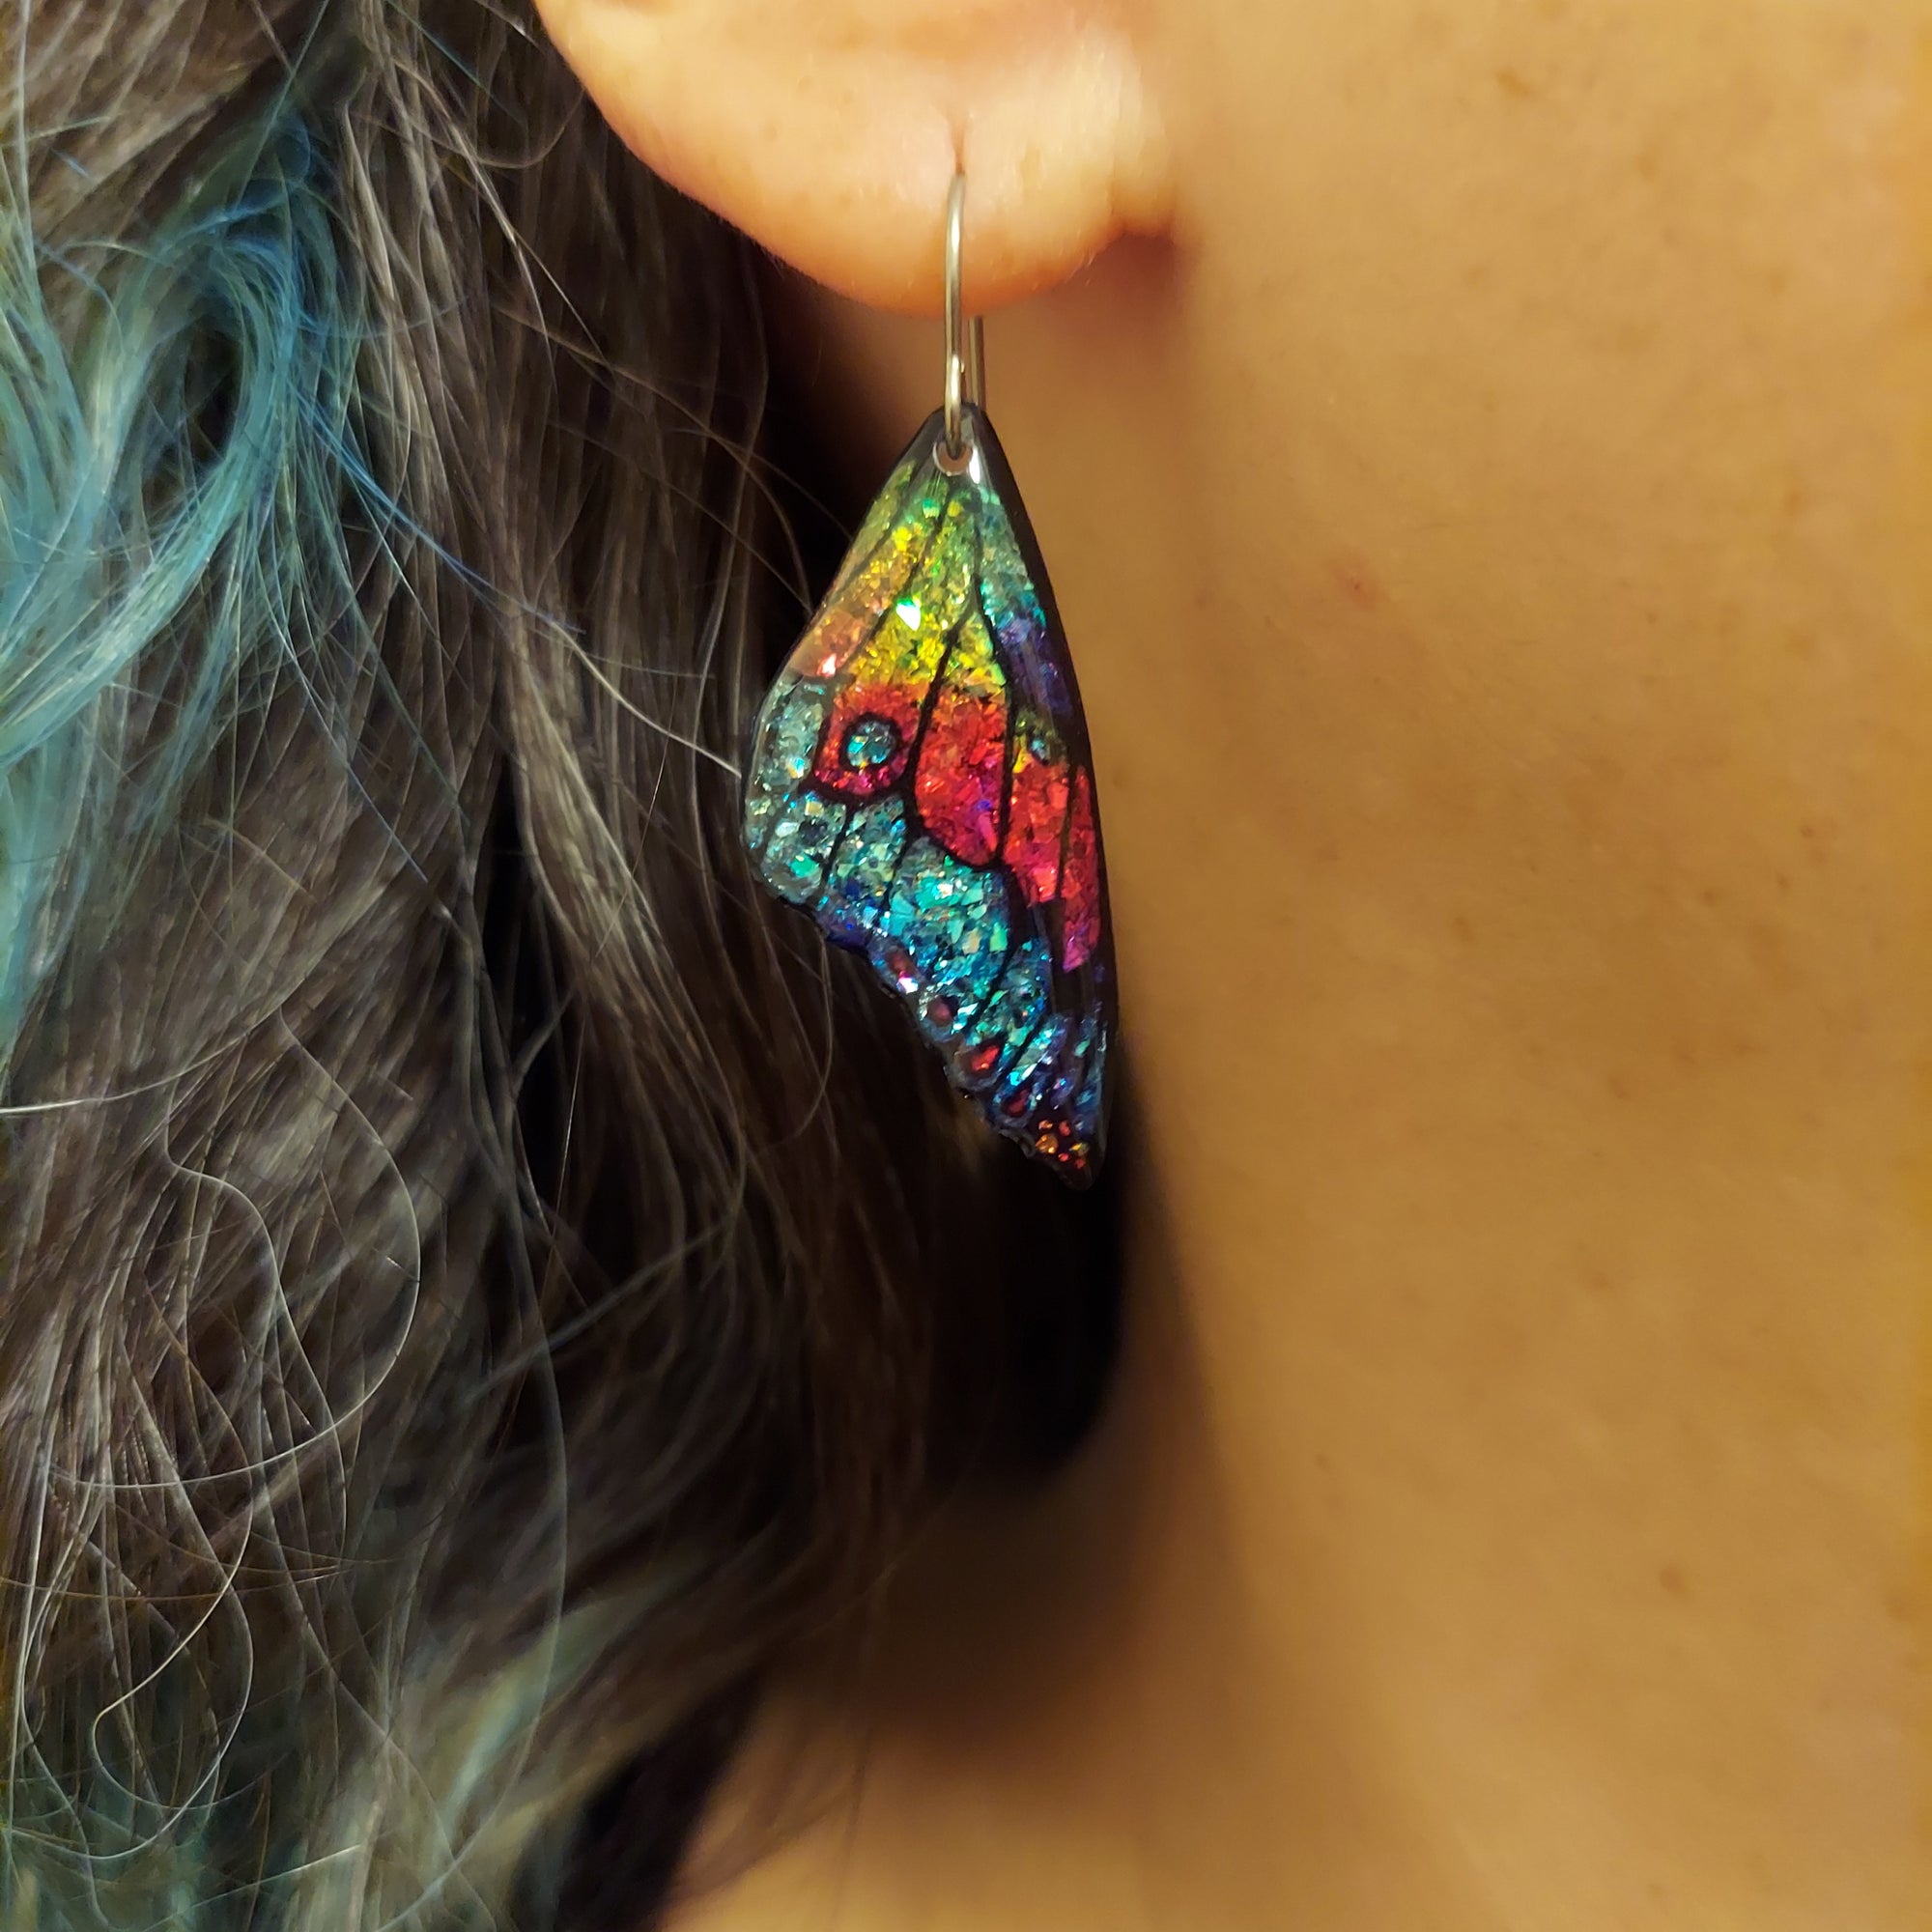 #34 (2) Small Red-Blue Sparkly Butterfly Wing Earrings